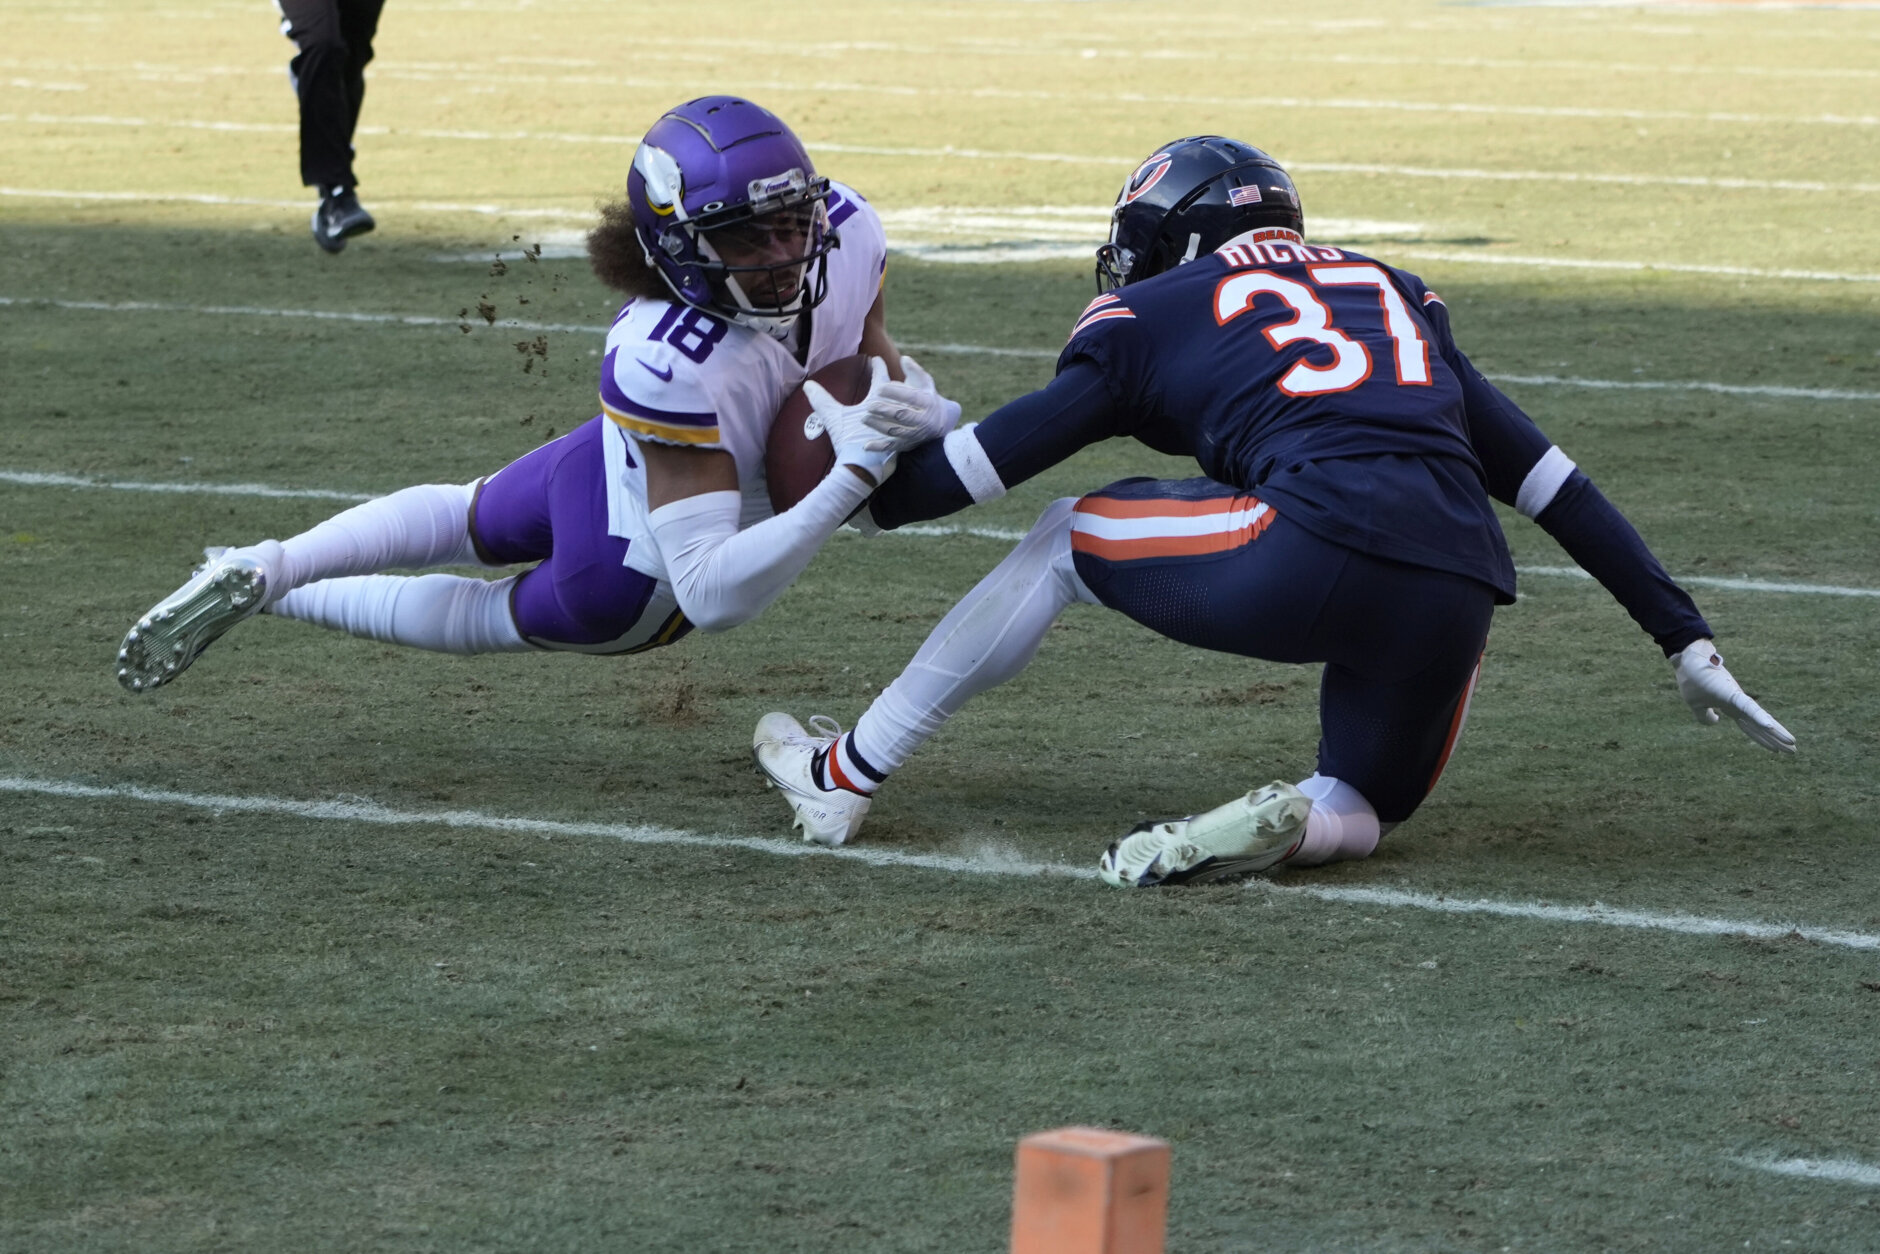 <p><em><strong>Vikings 29</strong></em><br />
<em><strong>Bears 13</strong></em></p>
<p>For the first time since 1947, the Chicago Bears are on the clock thanks to undesirable franchise records for consecutive losses (10) and total losses (14) in a season. But fear not, Bears fans &#8212; you already have a franchise quarterback so dealing away the No. 1 overall pick to someone who does not will give Justin Fields all the help he needs to get Chicago back to contention.</p>
<p>And even with this blowout victory, Minnesota is a 13-4 team that was actually outscored 424-427 in 2022. It just feels like the Vikings&#8217; stay in the playoffs will be brief.</p>
